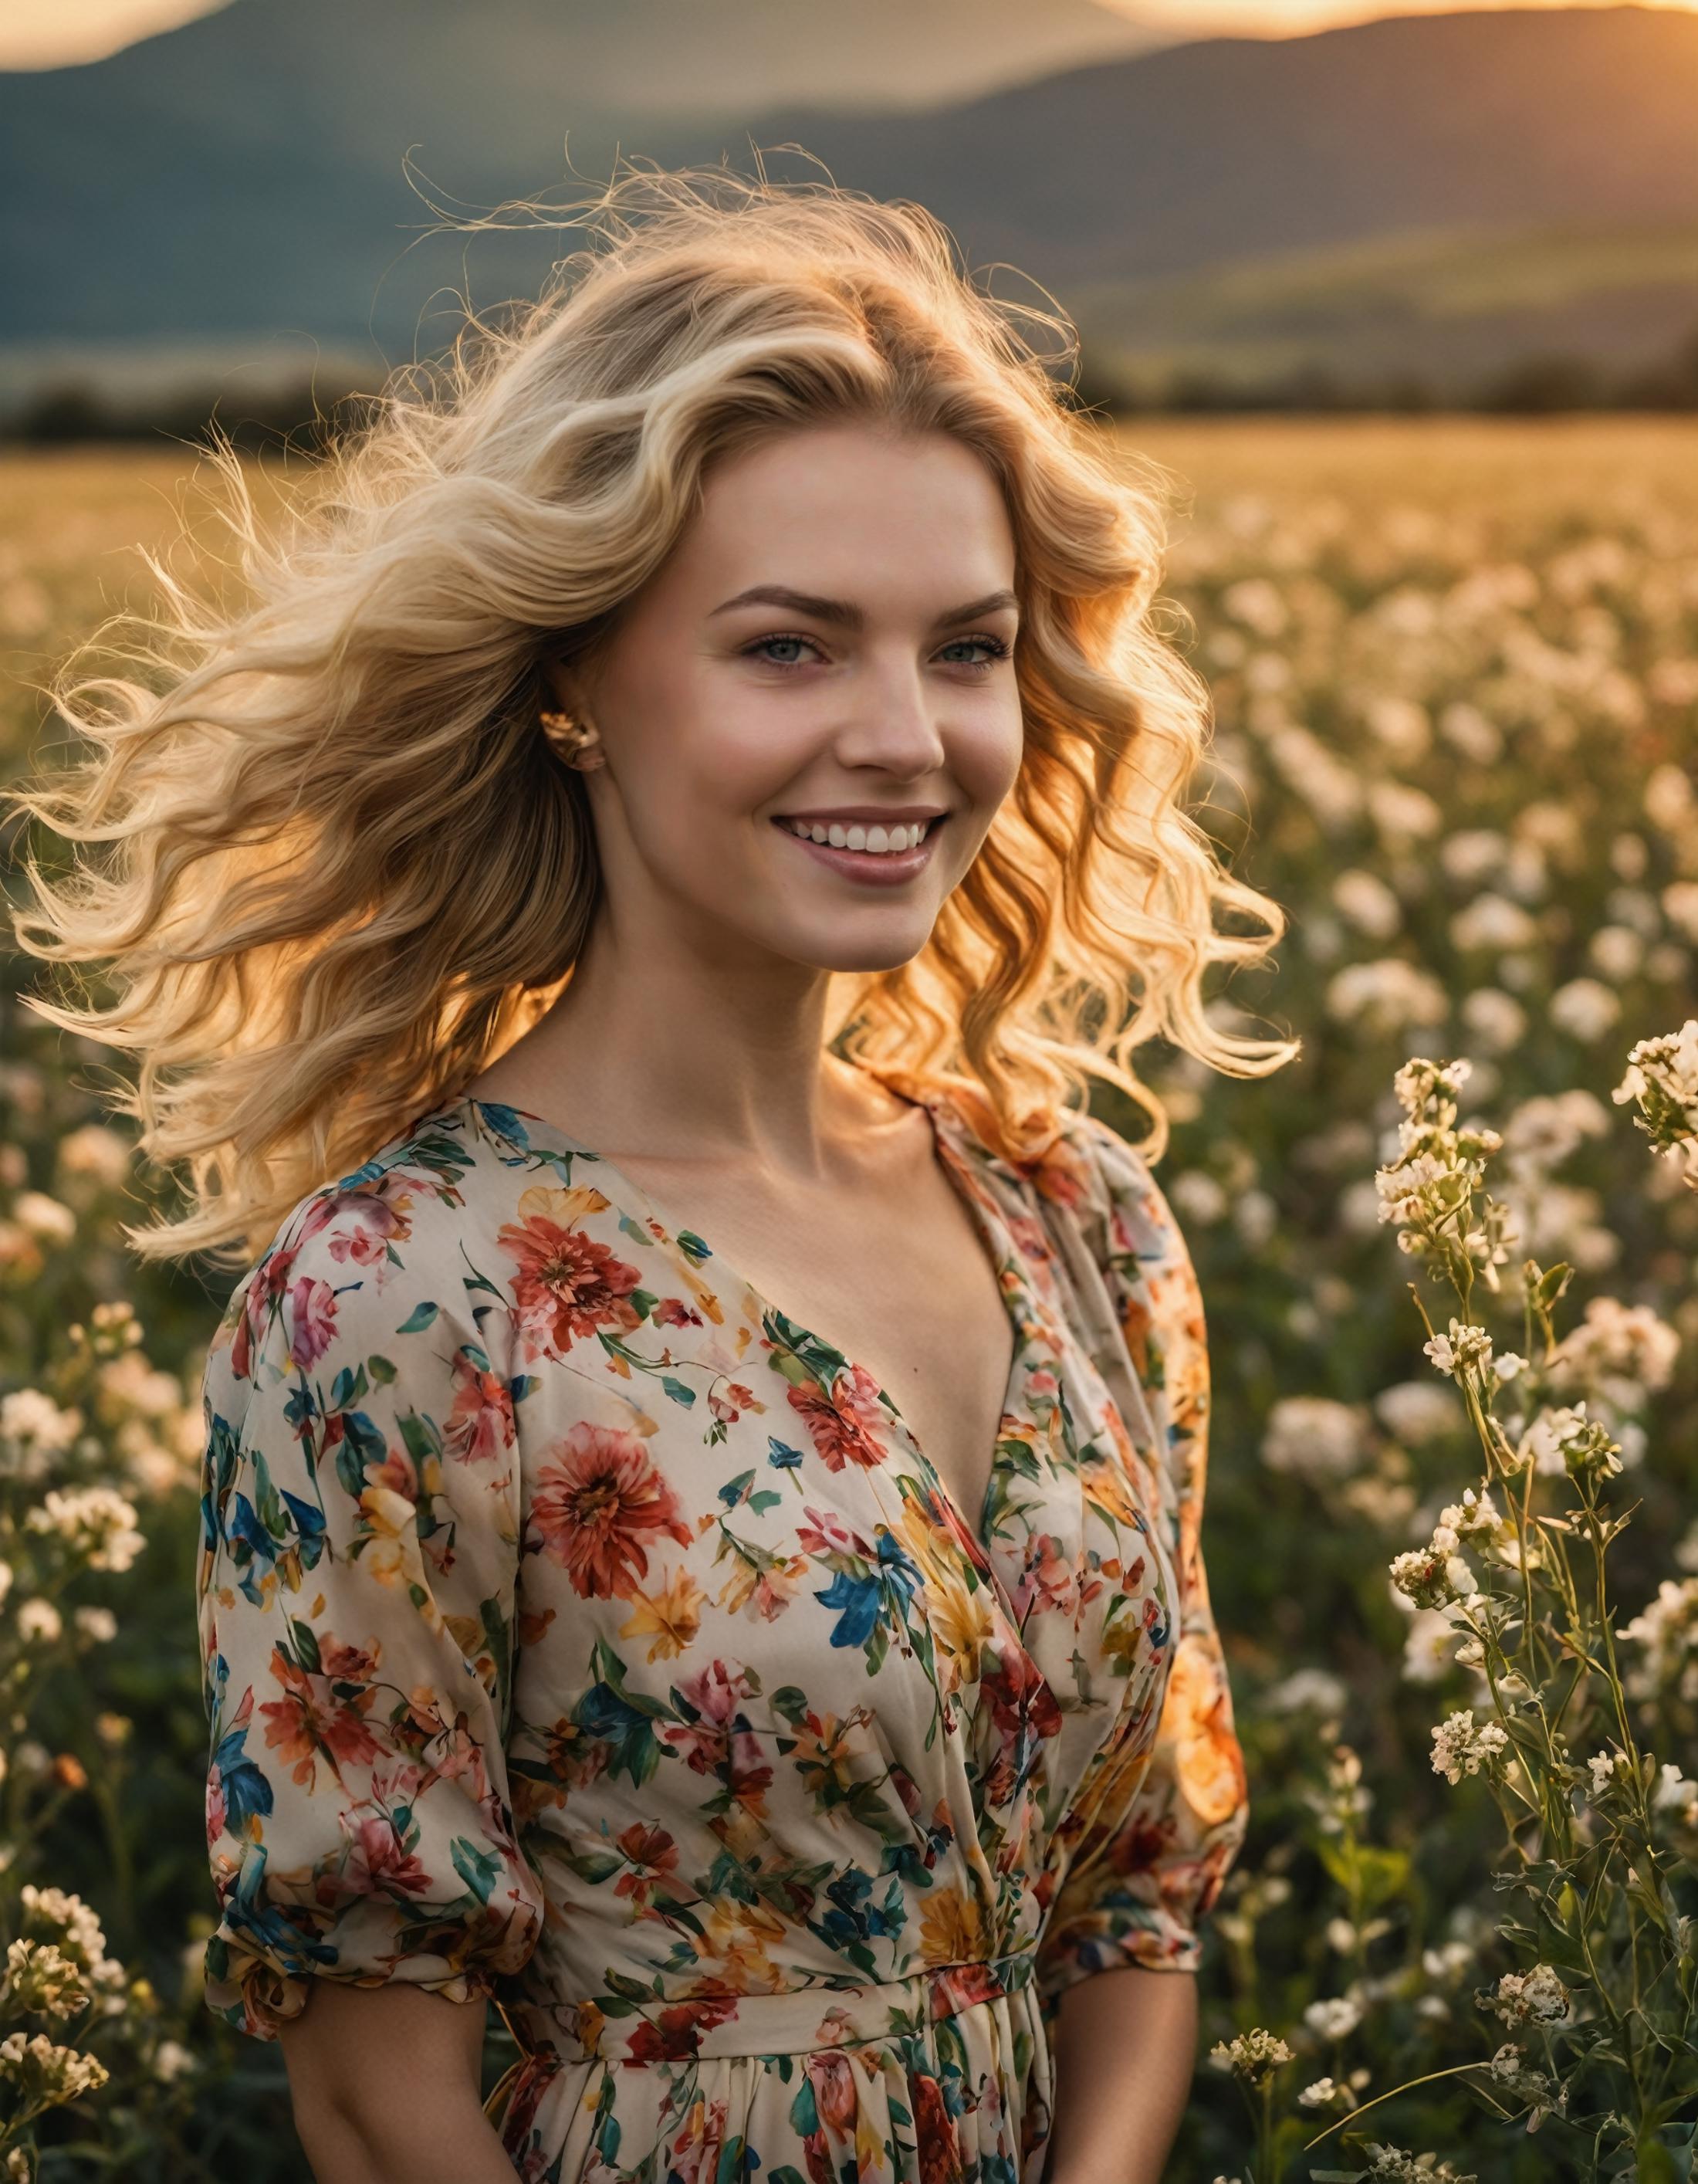 A young woman in a flowery dress posing in a field of flowers.